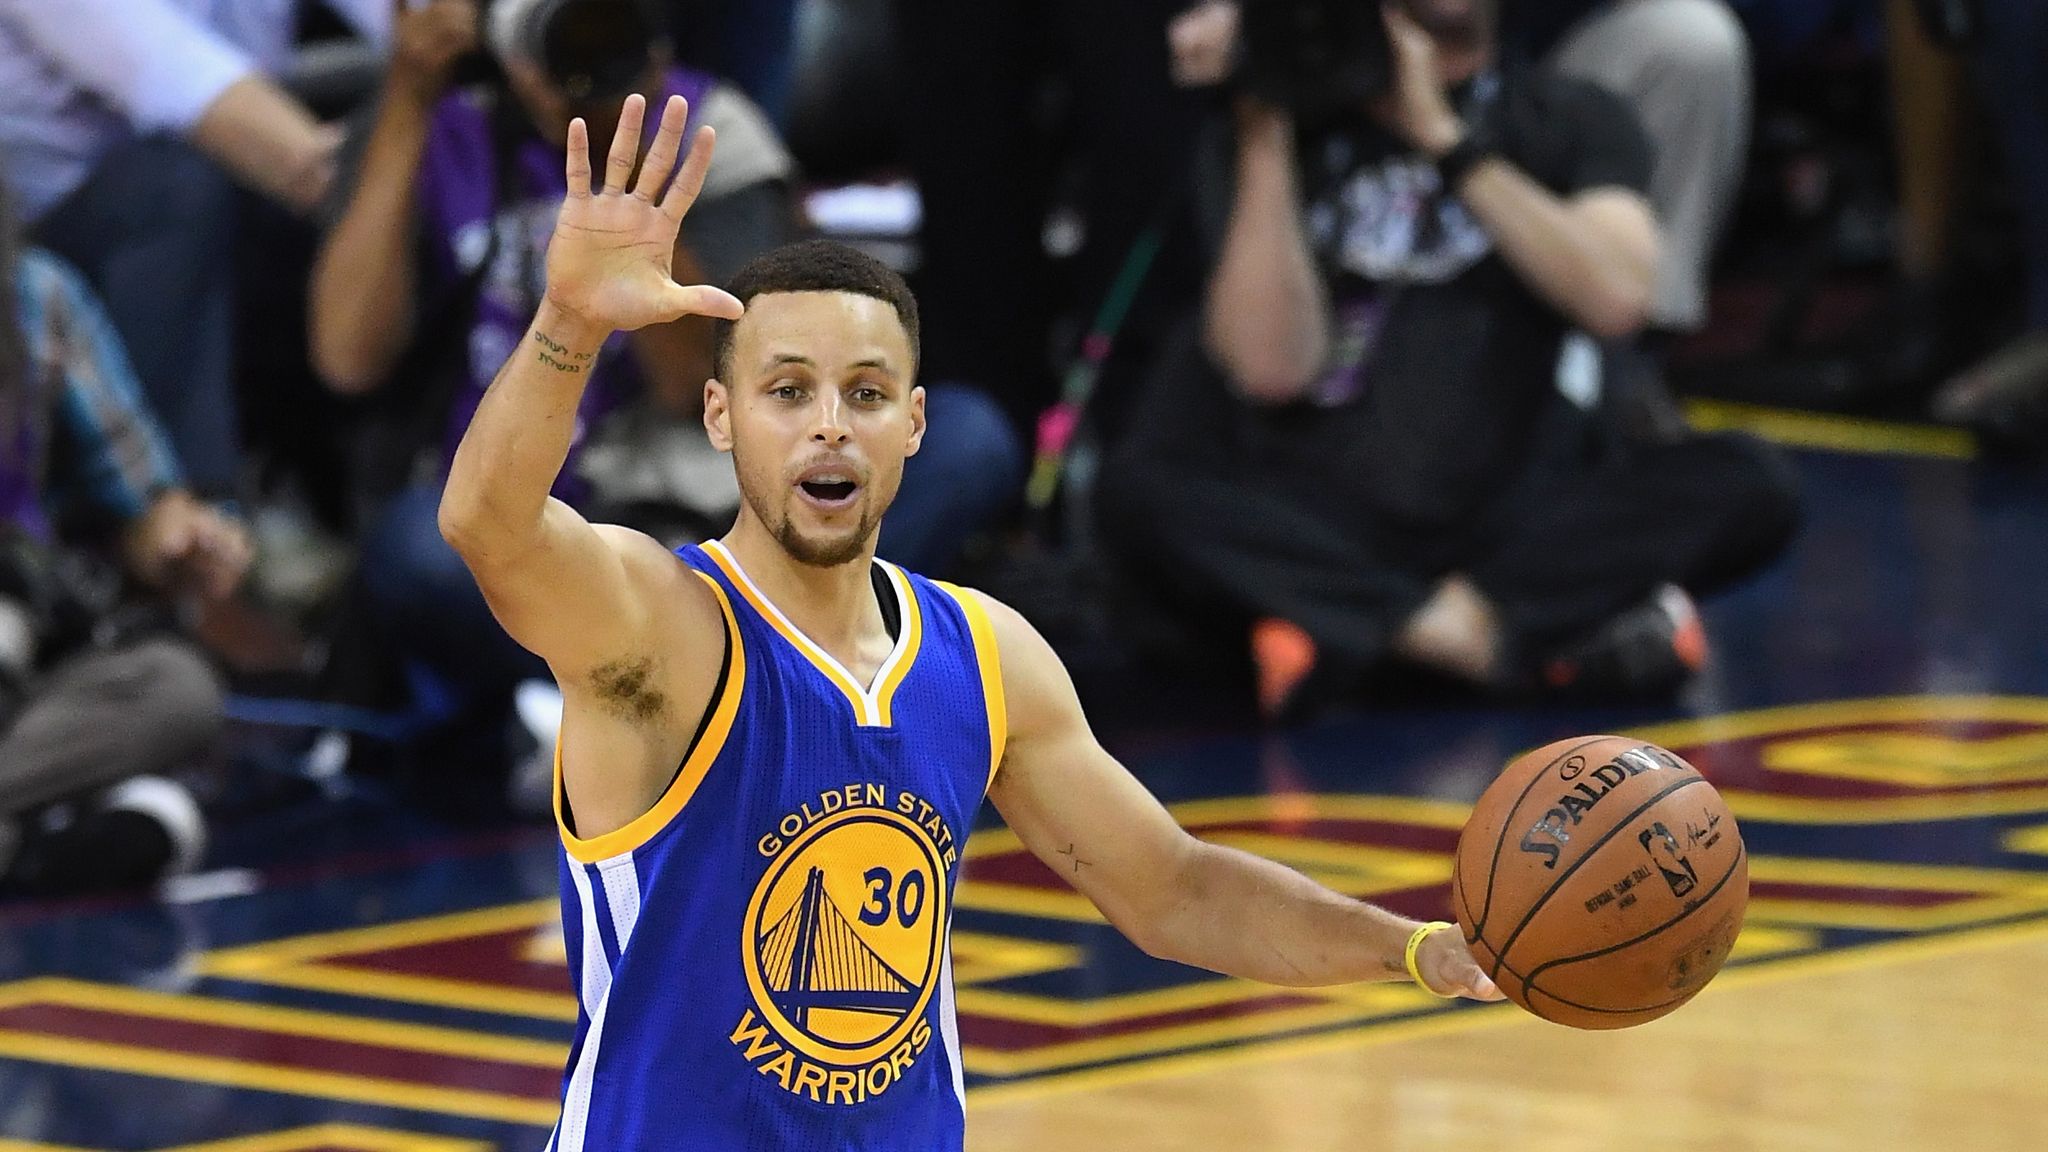 Golden State Warriors: The latest US dream team? | NFL News | Sky Sports